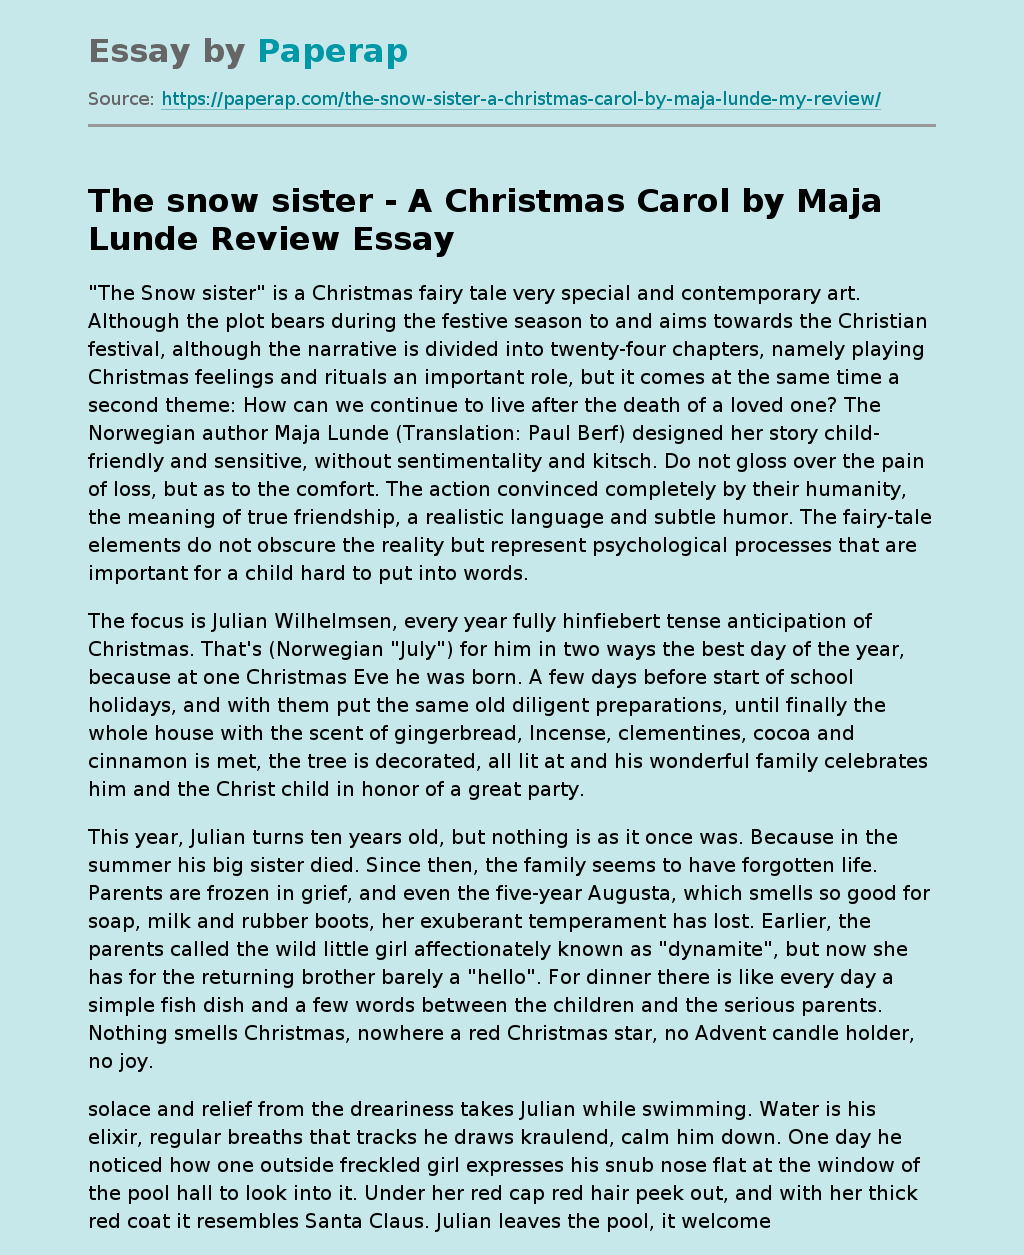 The snow sister - A Christmas Carol by Maja Lunde Review